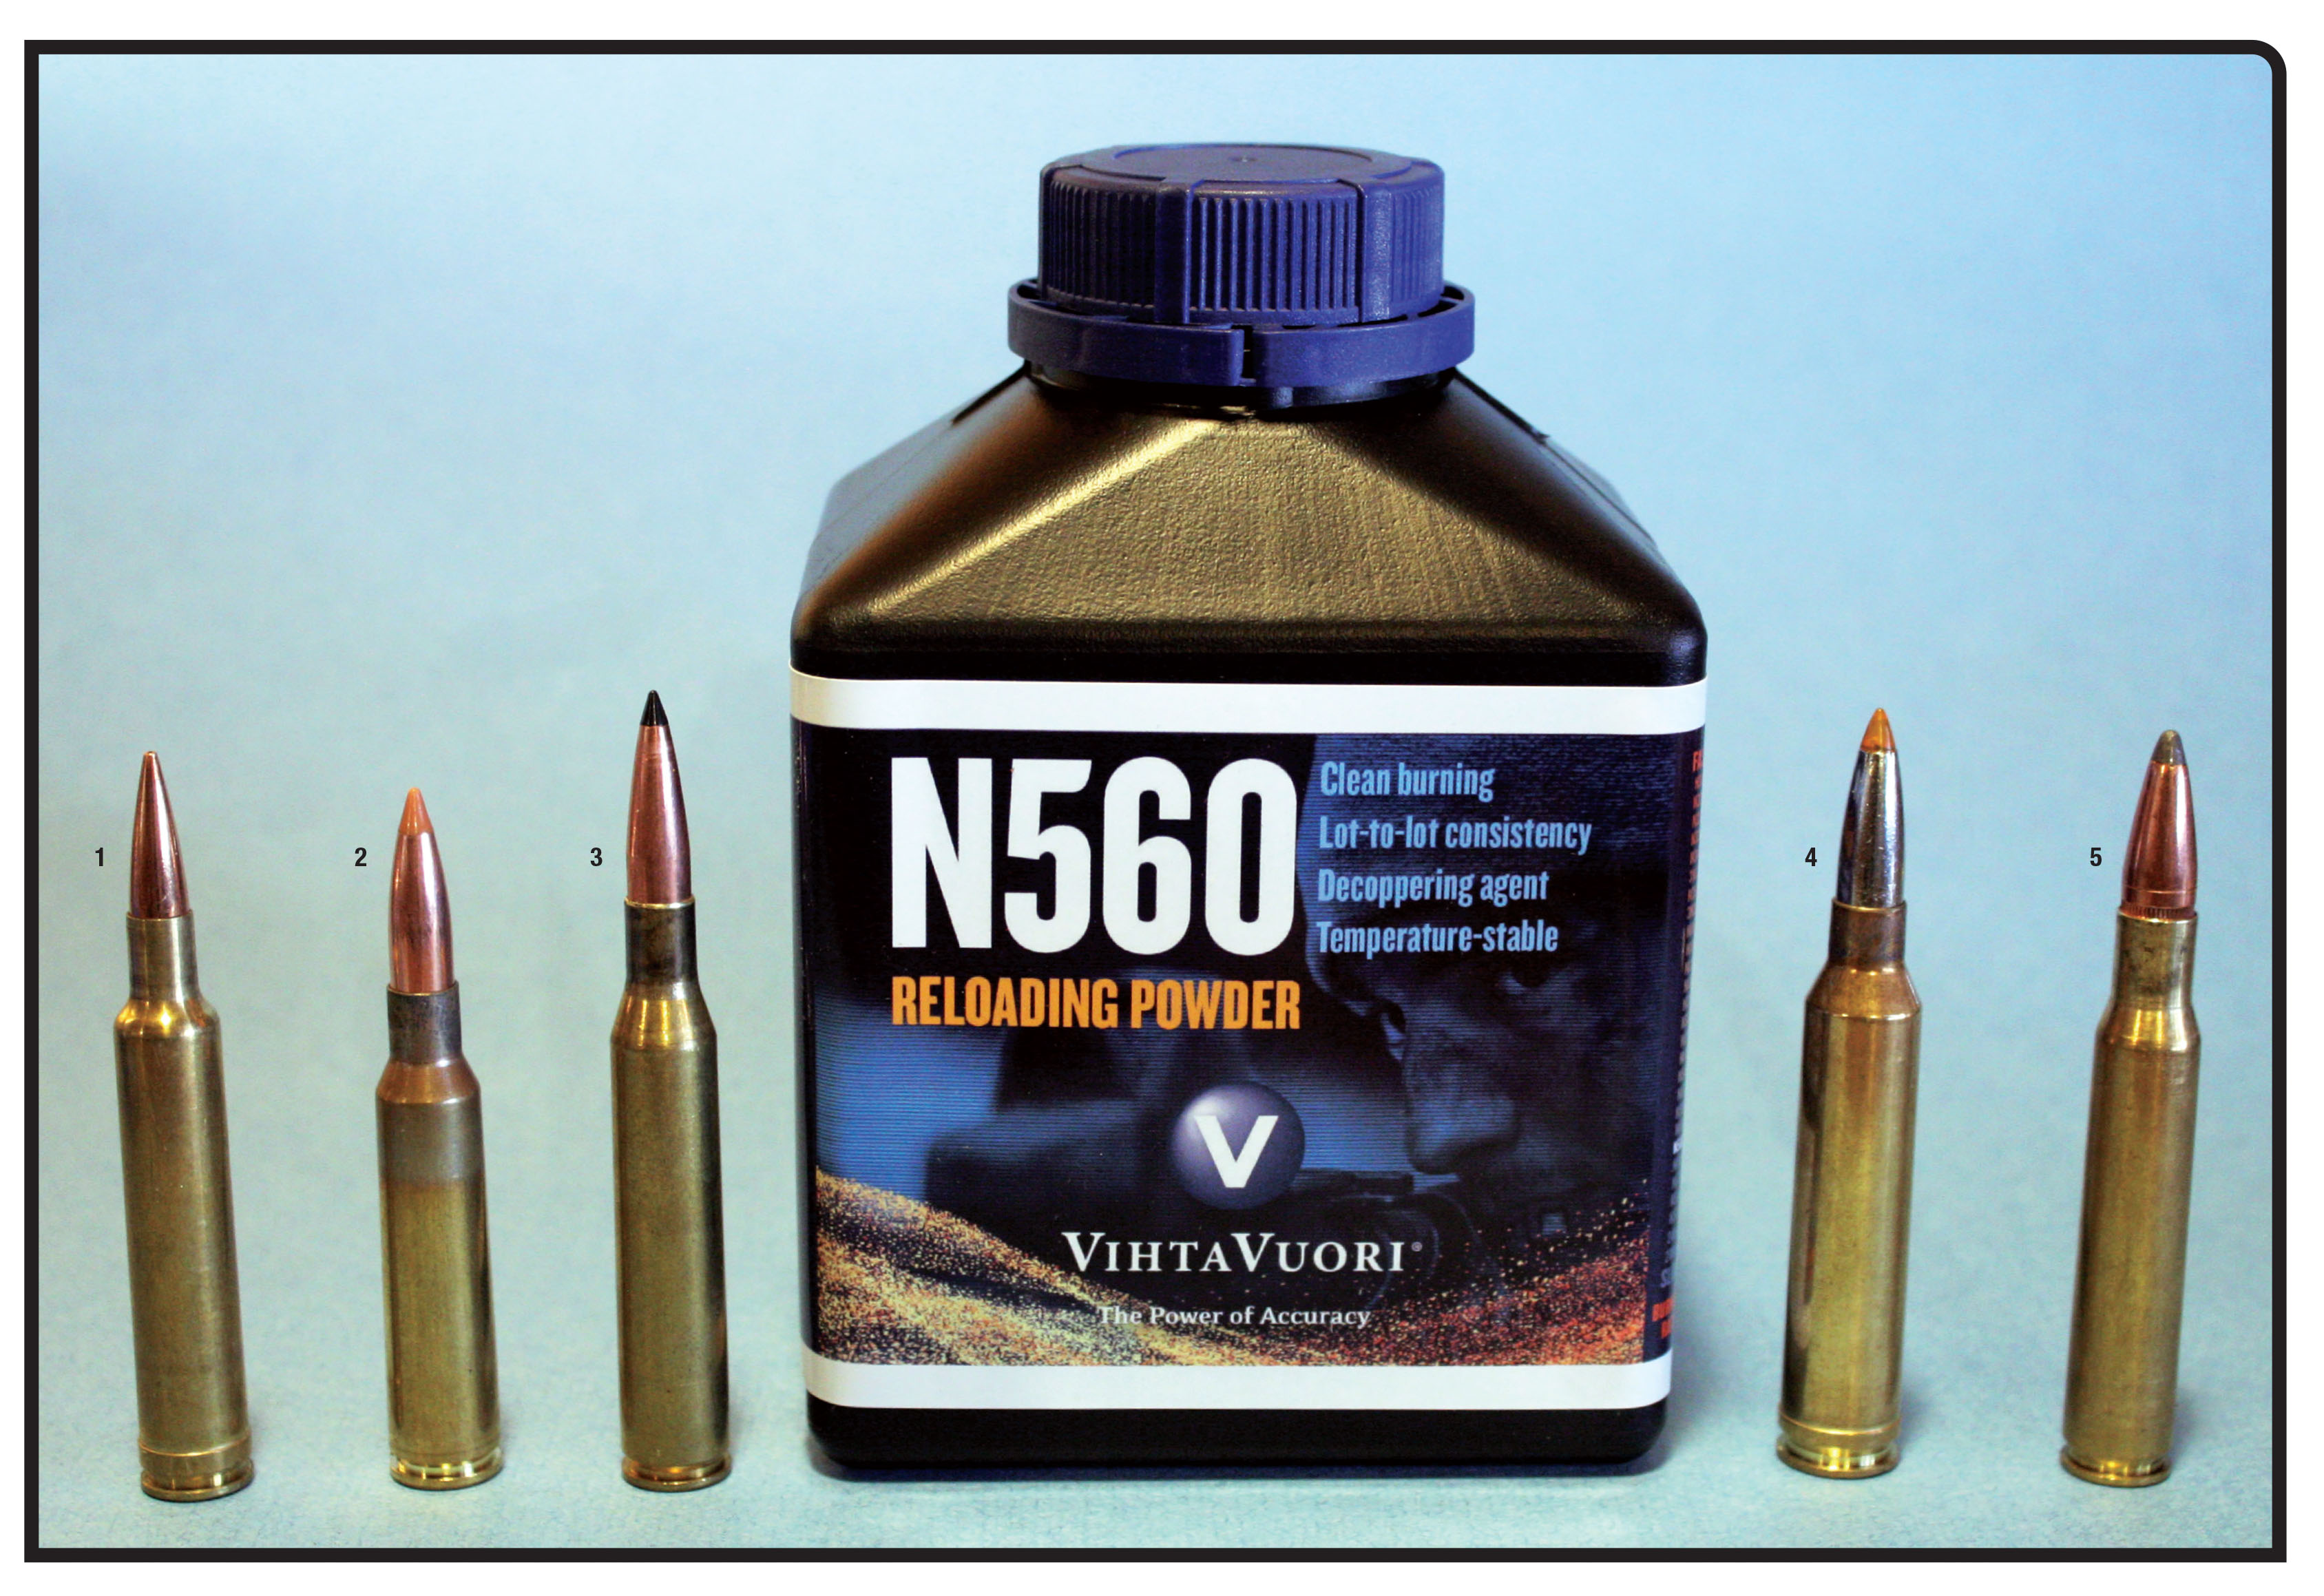 John has used N560 in more cartridges than any other Vihtavuori powder, including the (1) .240 Weatherby Magnum, (2) 6.5x55, (3) .270 Winchester, (4) 7mm Remington Magnum and (5) .30-06.